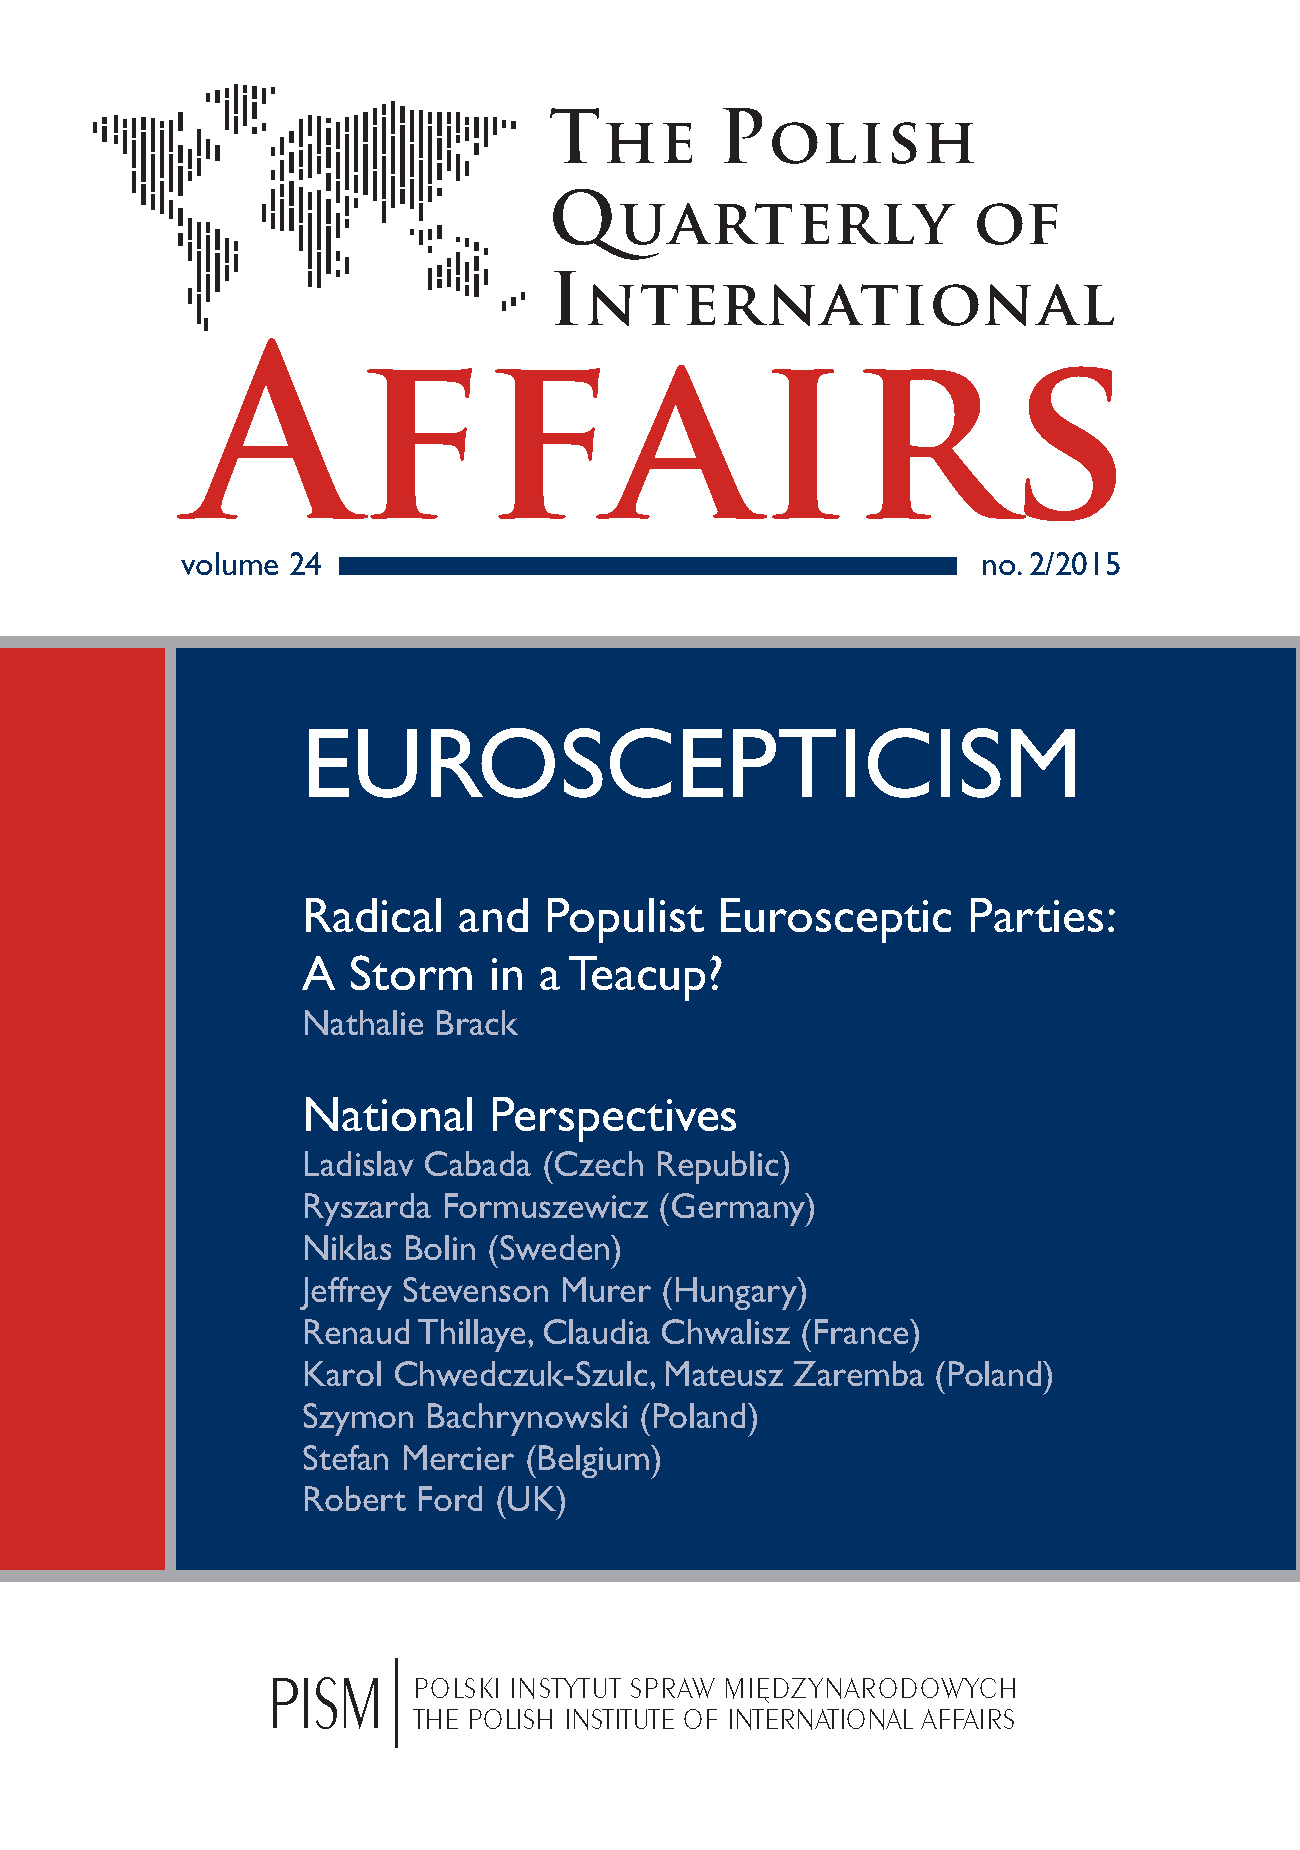 Radical and Populist Eurosceptic Parties at the 2014 European Elections: A Storm in a Teacup? Cover Image